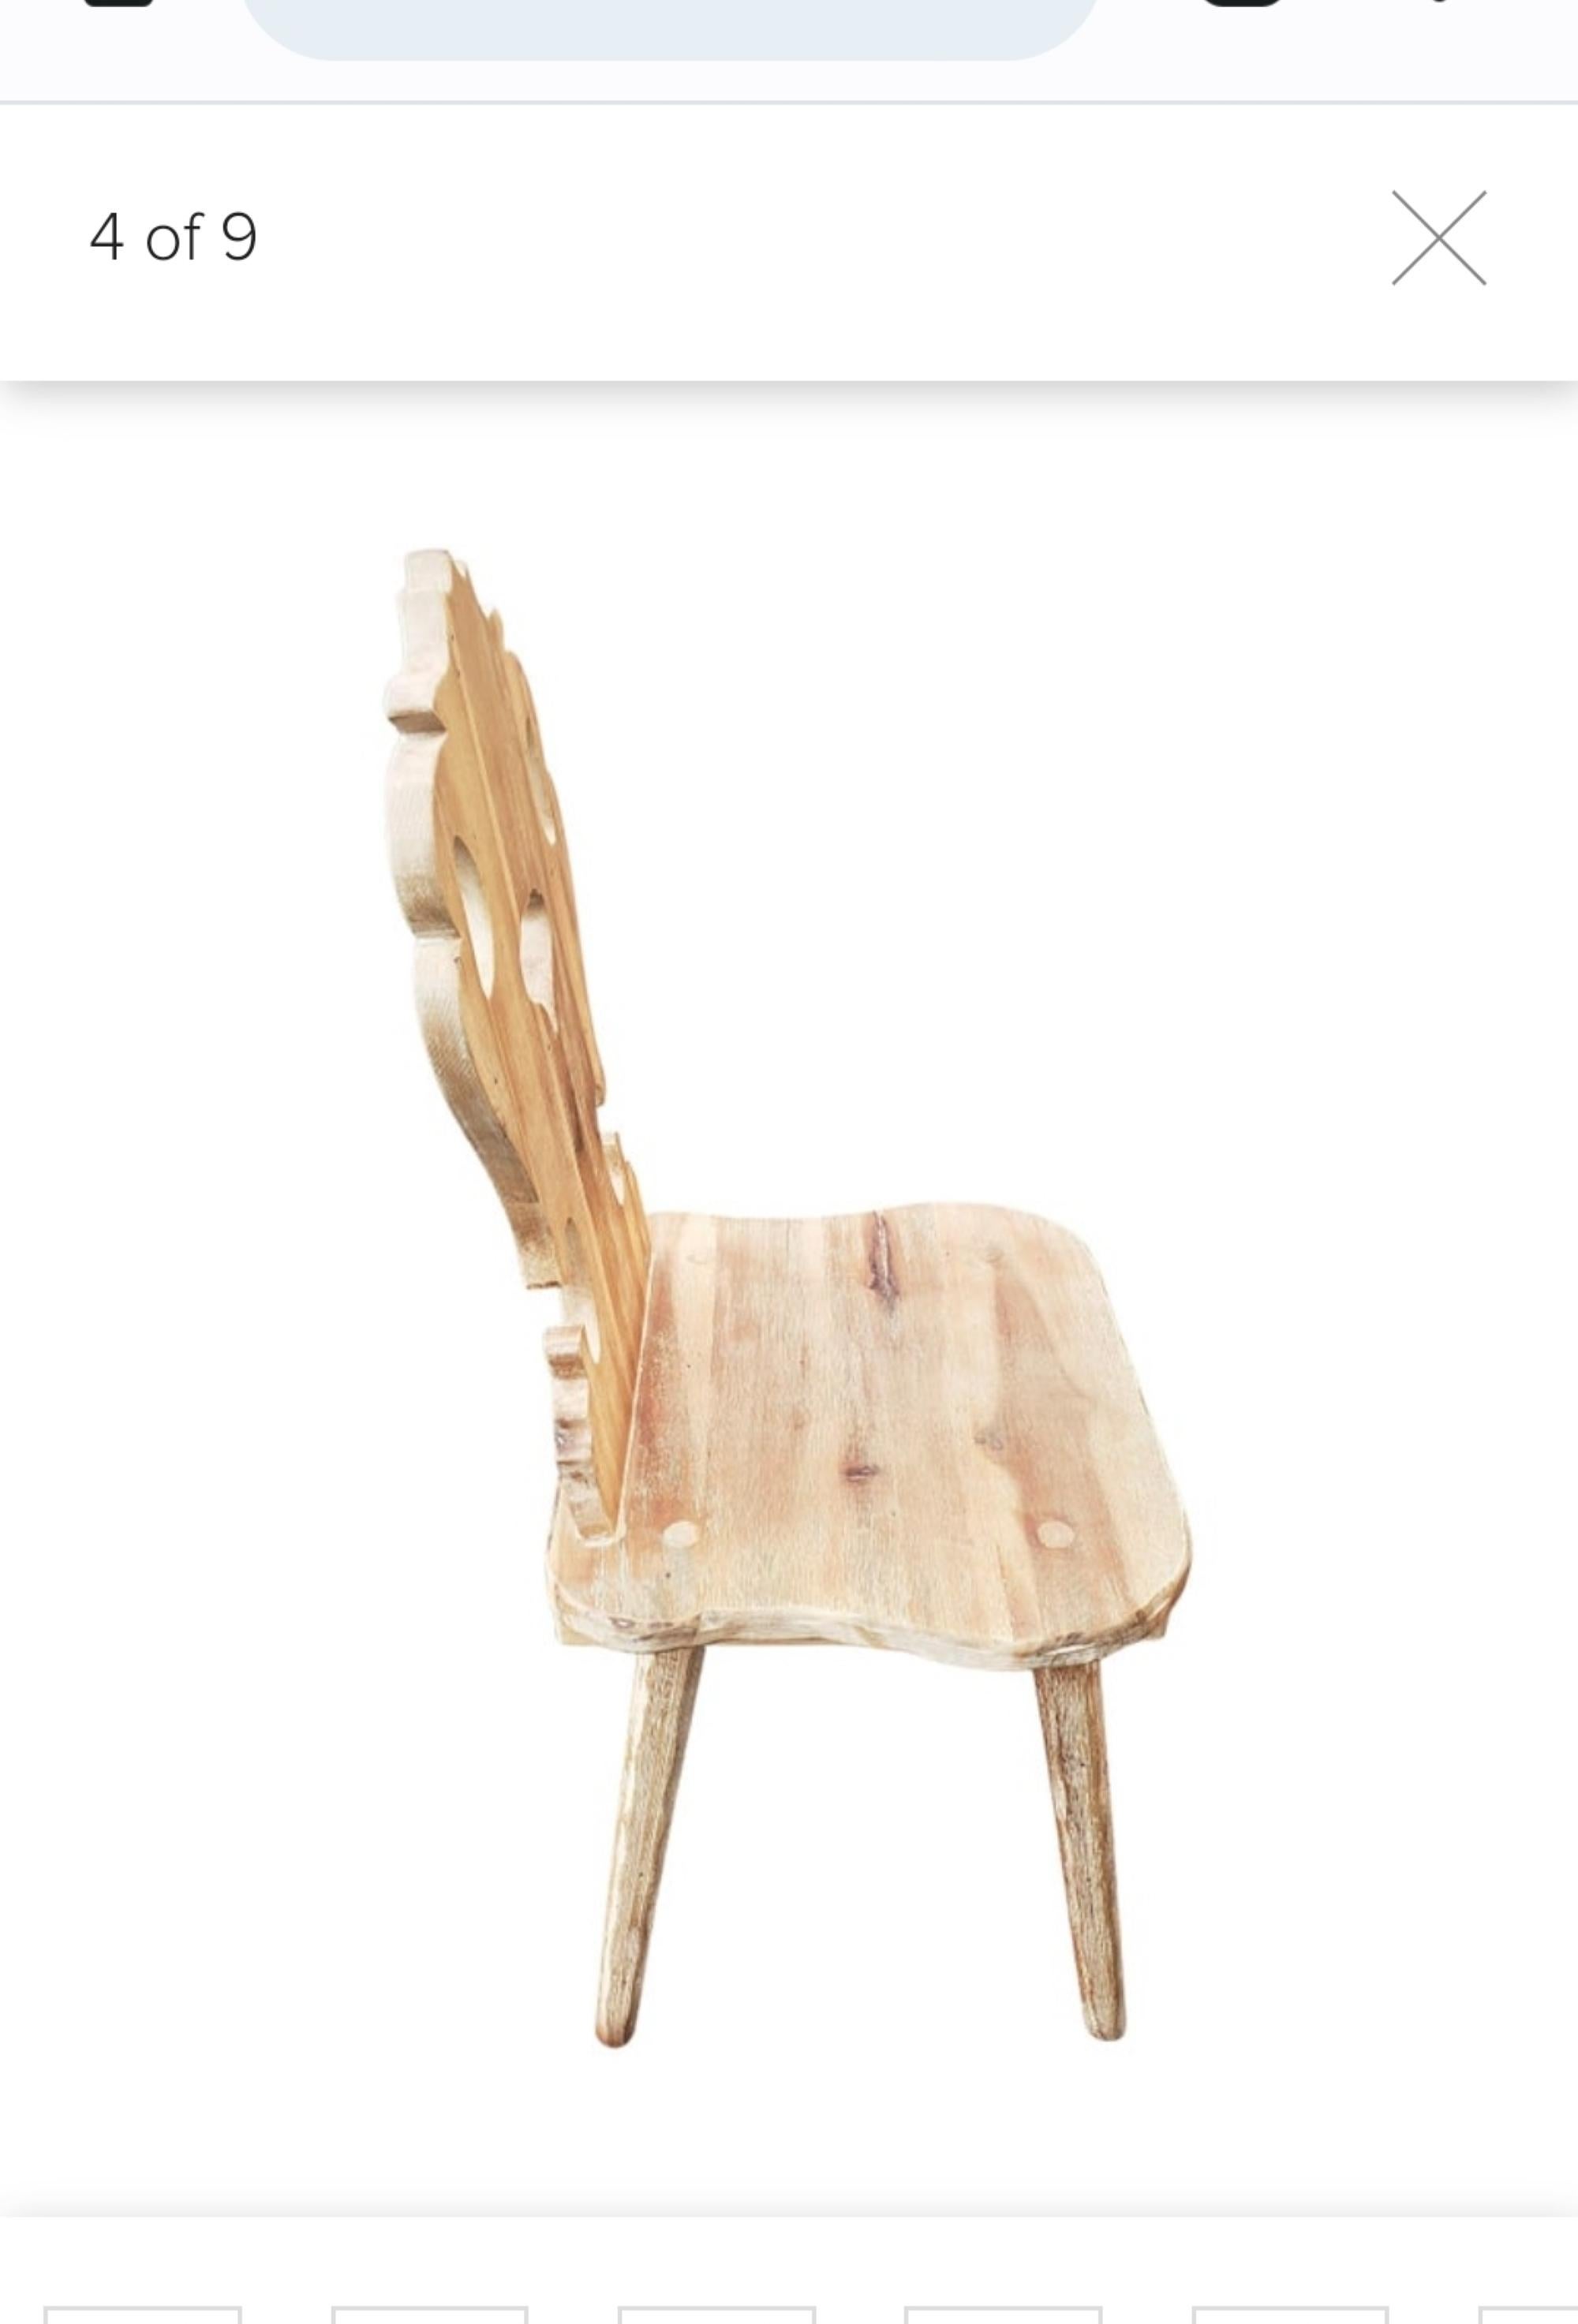 A stunning  vintage alpine swiss side chair in solid Elm. This was made in Switzerland and date from circa 1960s. It is of amazing quality and has a beautiful design, with elegant splayed legs, shapely backs and cut out heart motifs. We have had